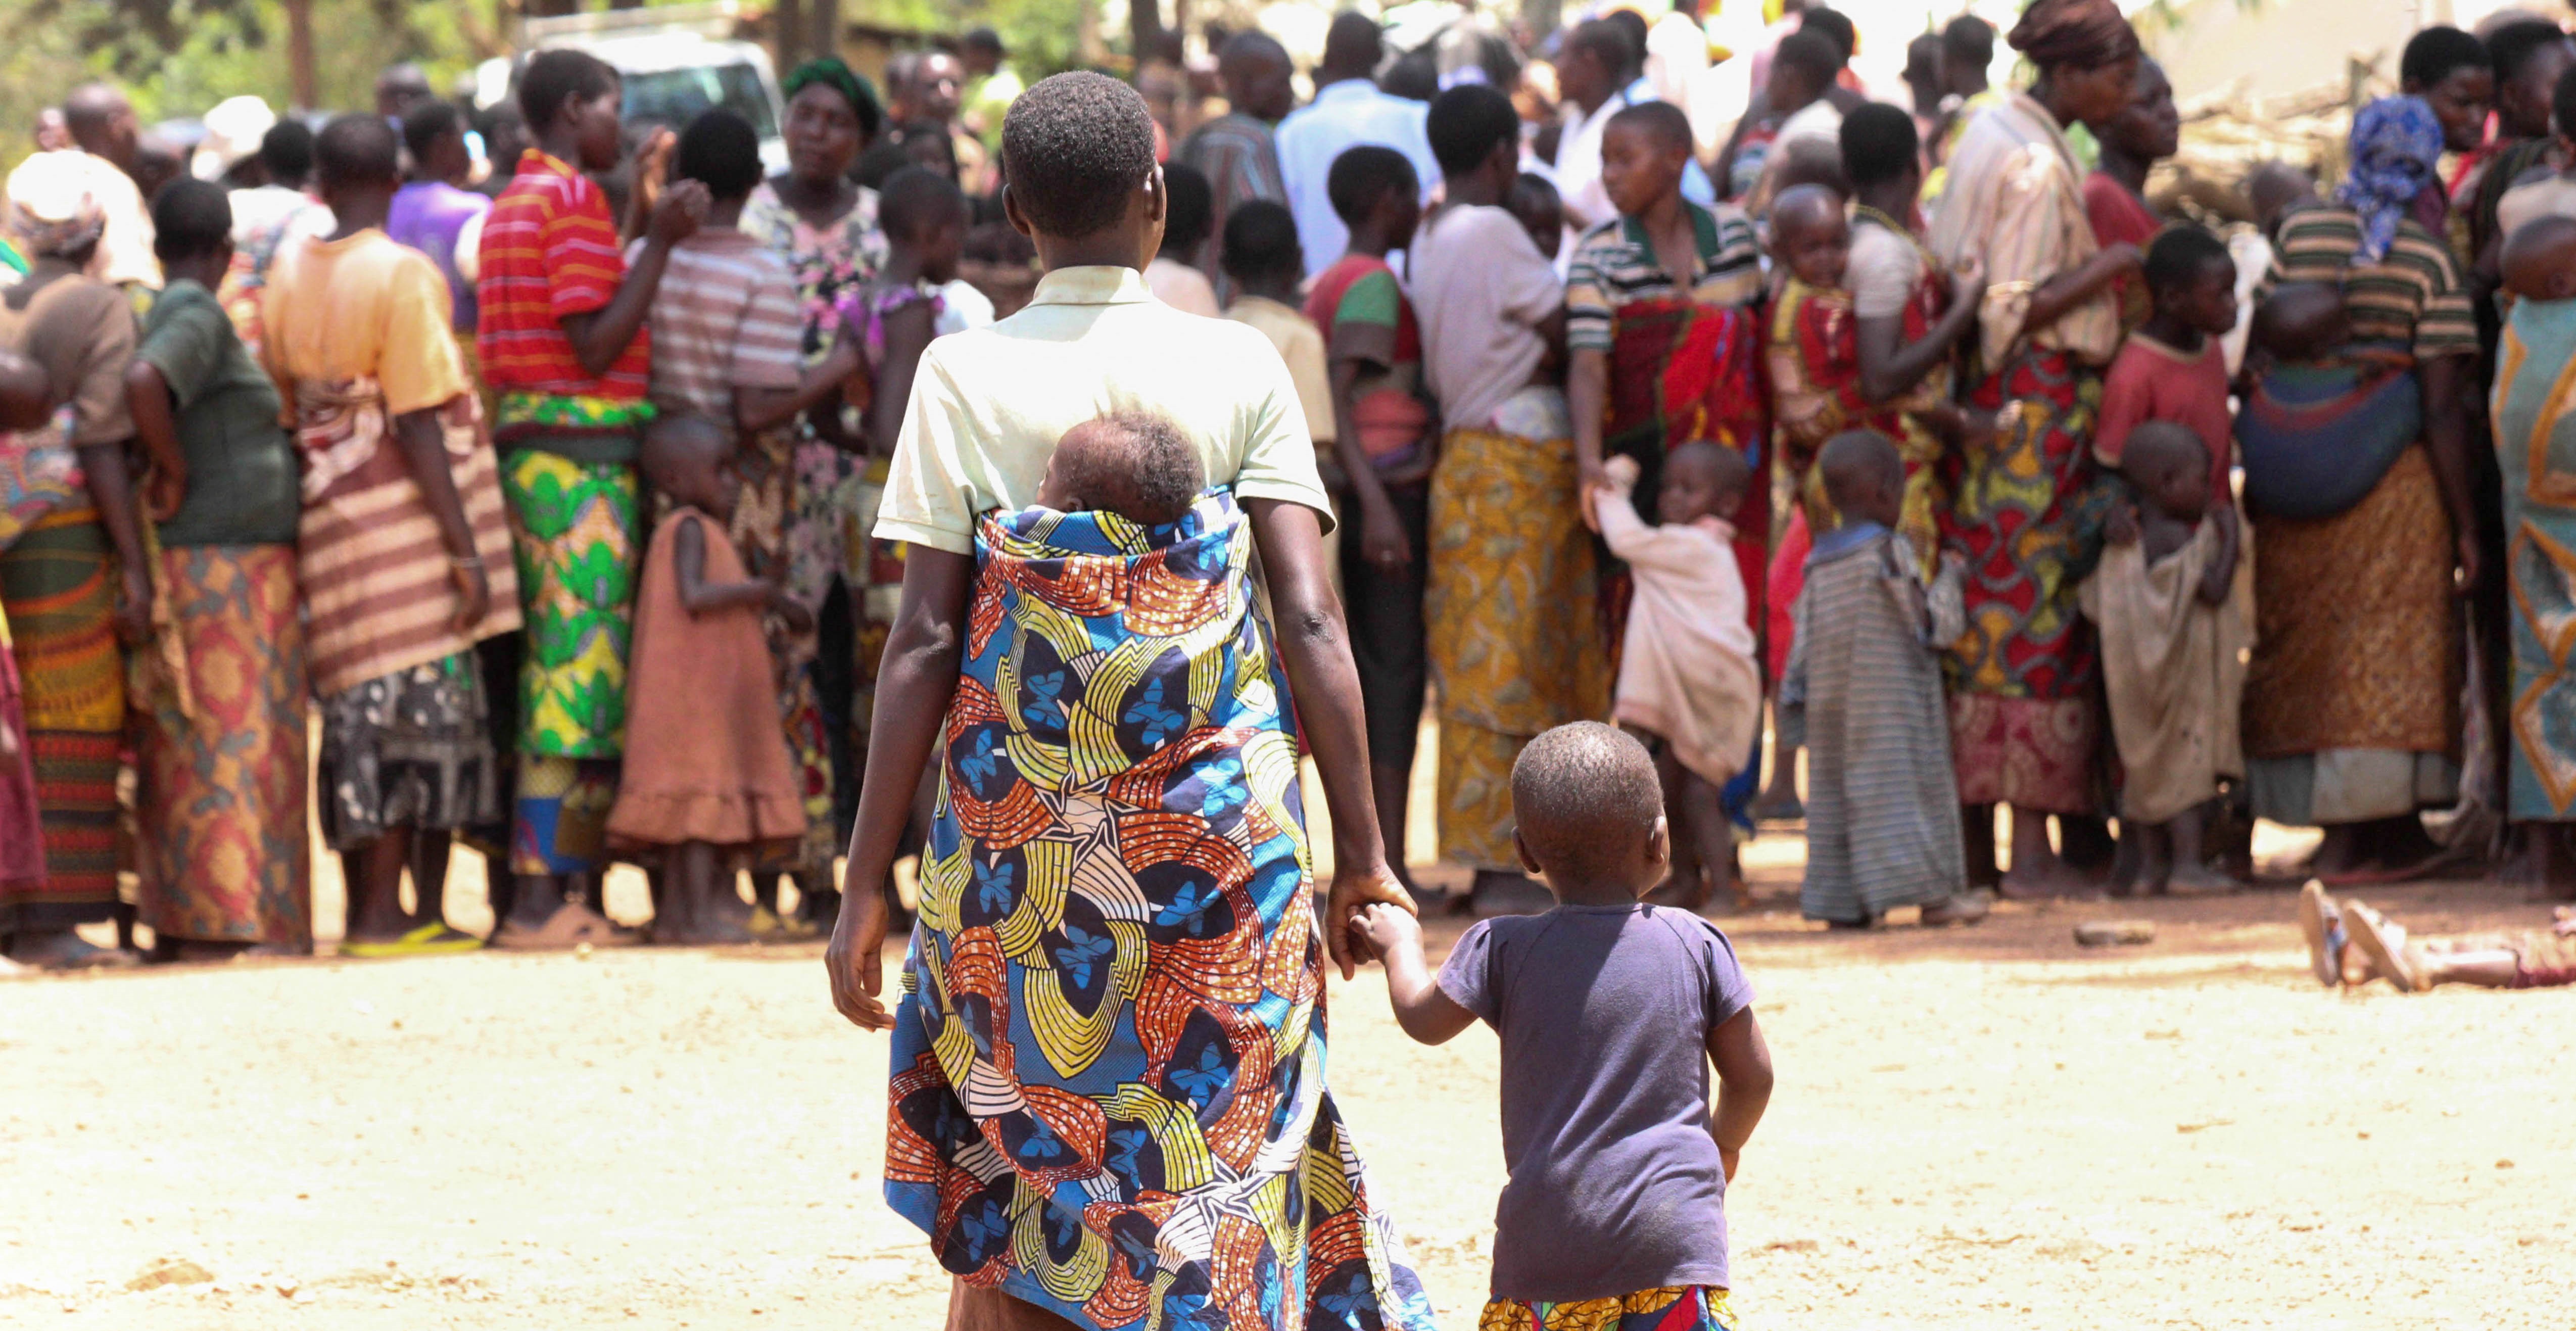 Burundian refugees continue to arrive in Rwanda at slow, steady pace as Burundi crisis passes two-year mark